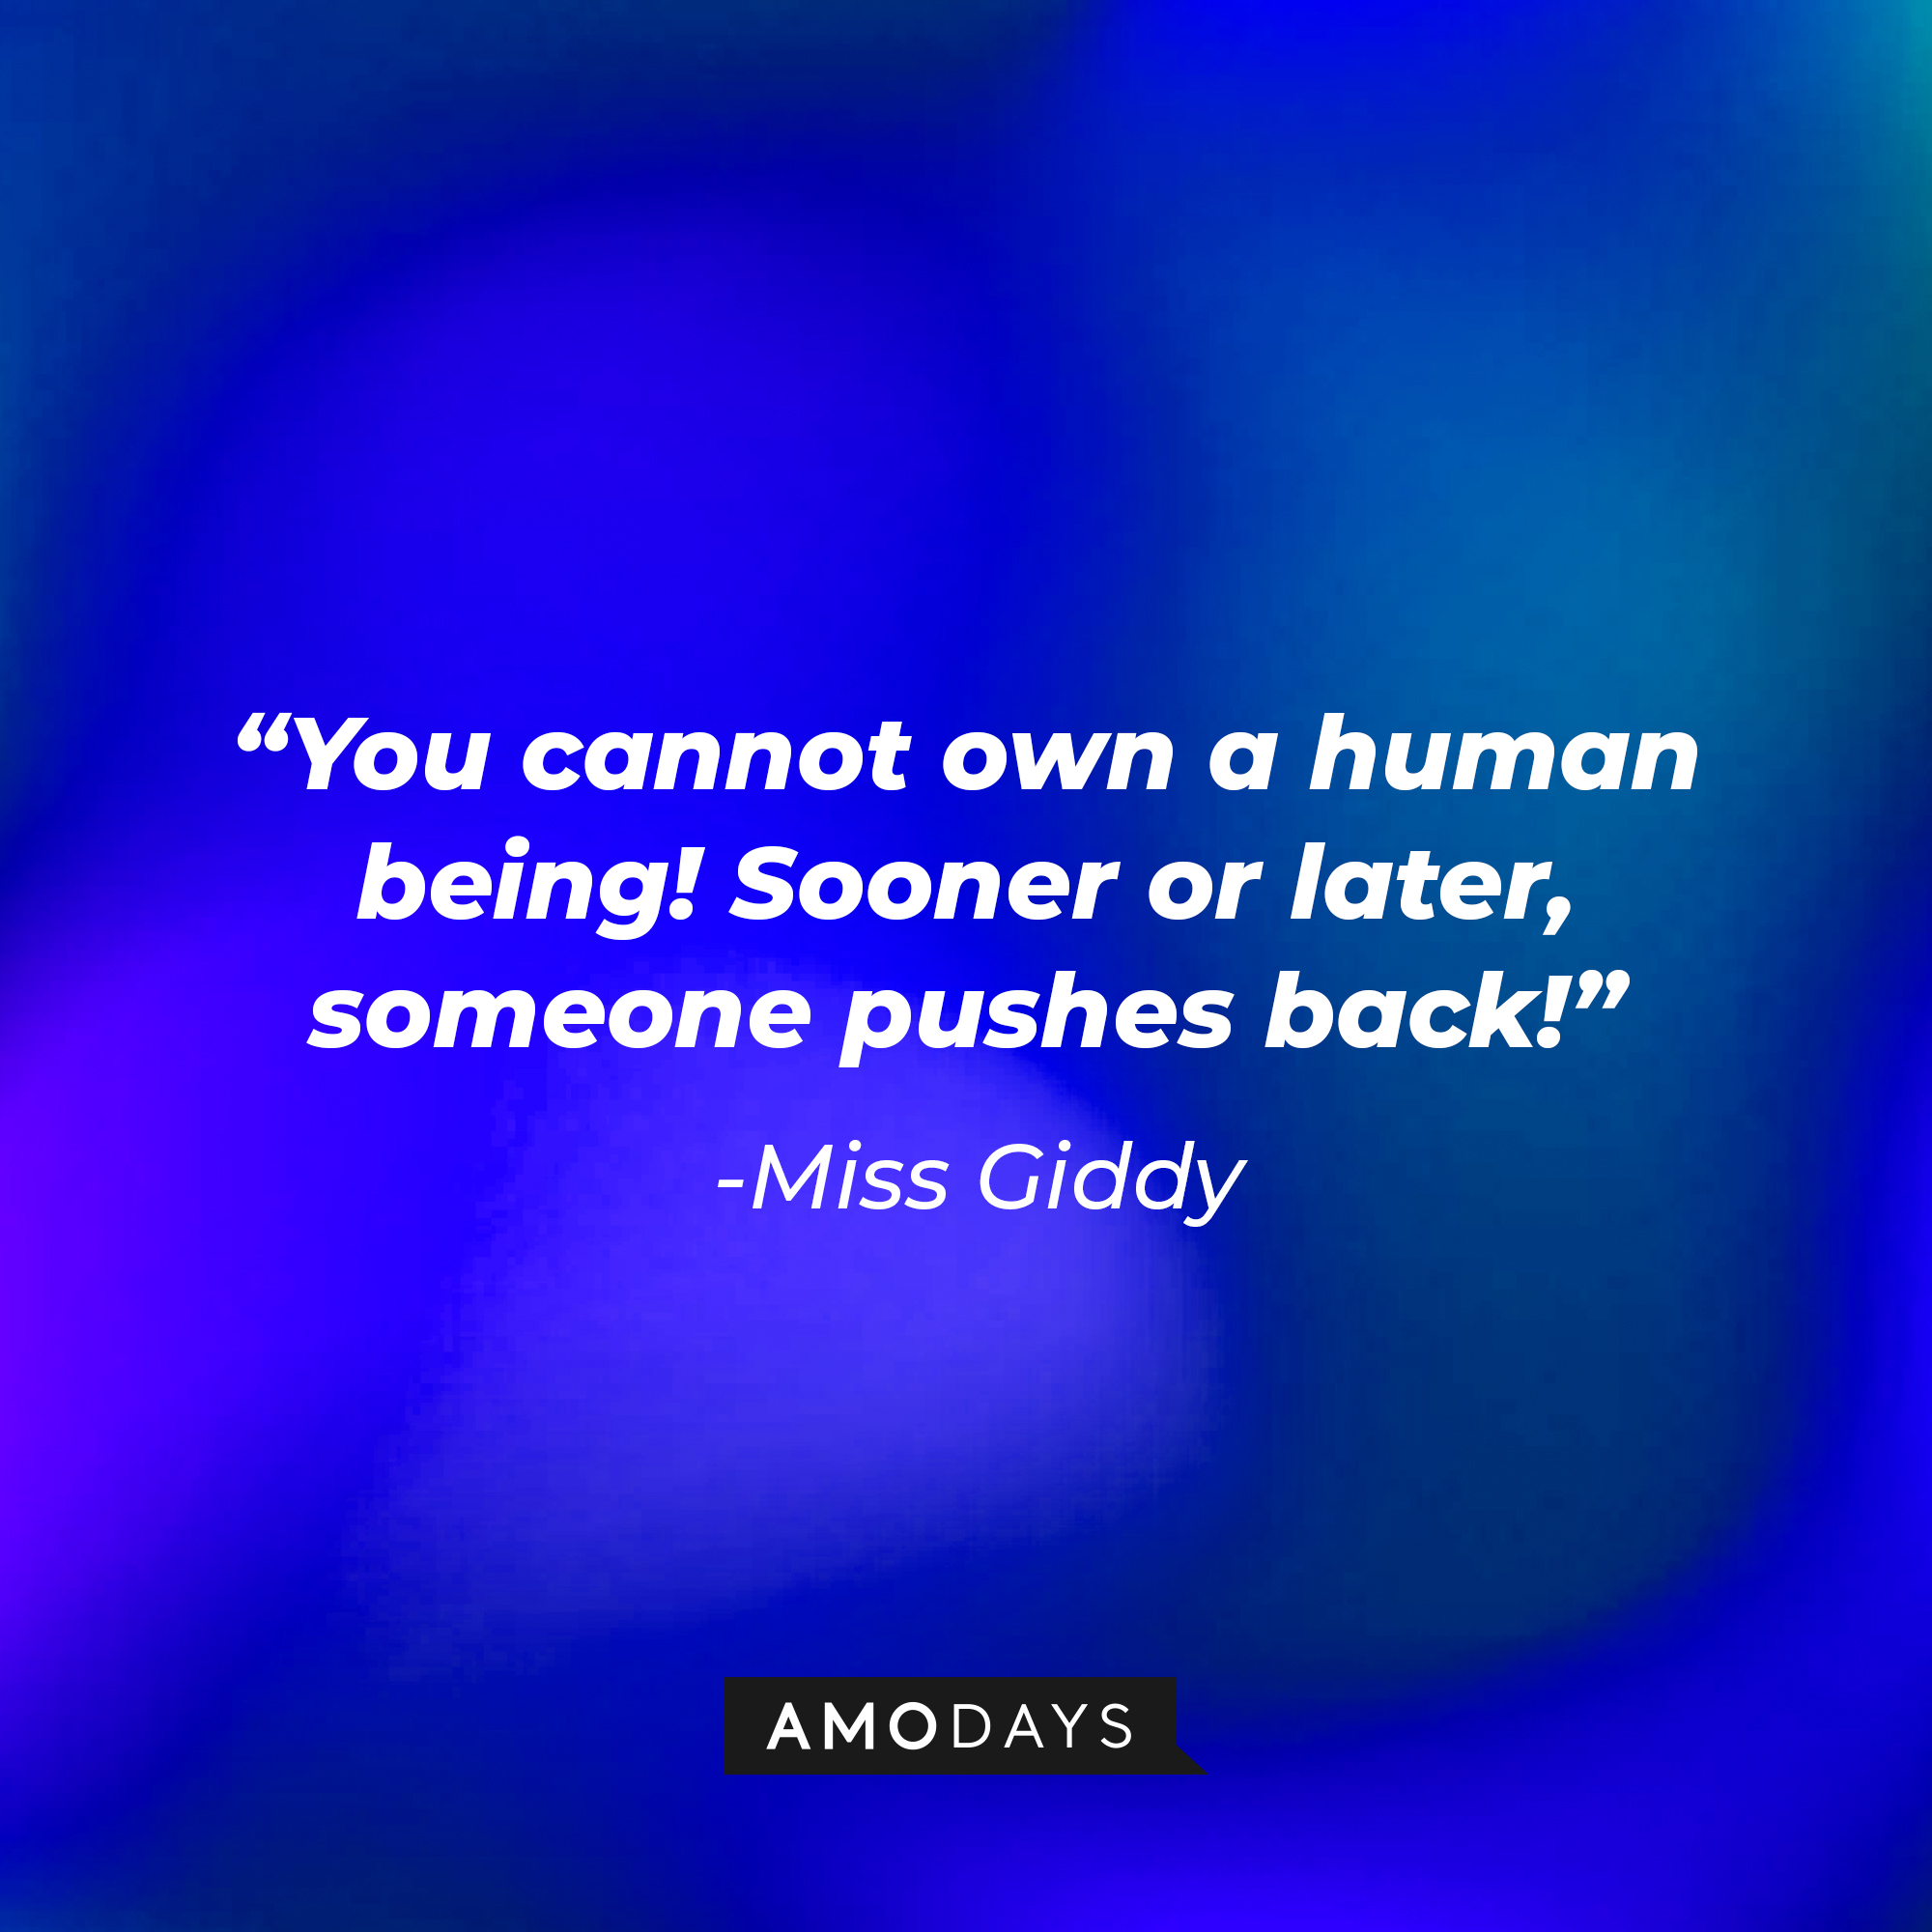 Miss Giddy’s quote: "You cannot own a human being! Sooner or later, someone pushes back!" | Source: AmoDays